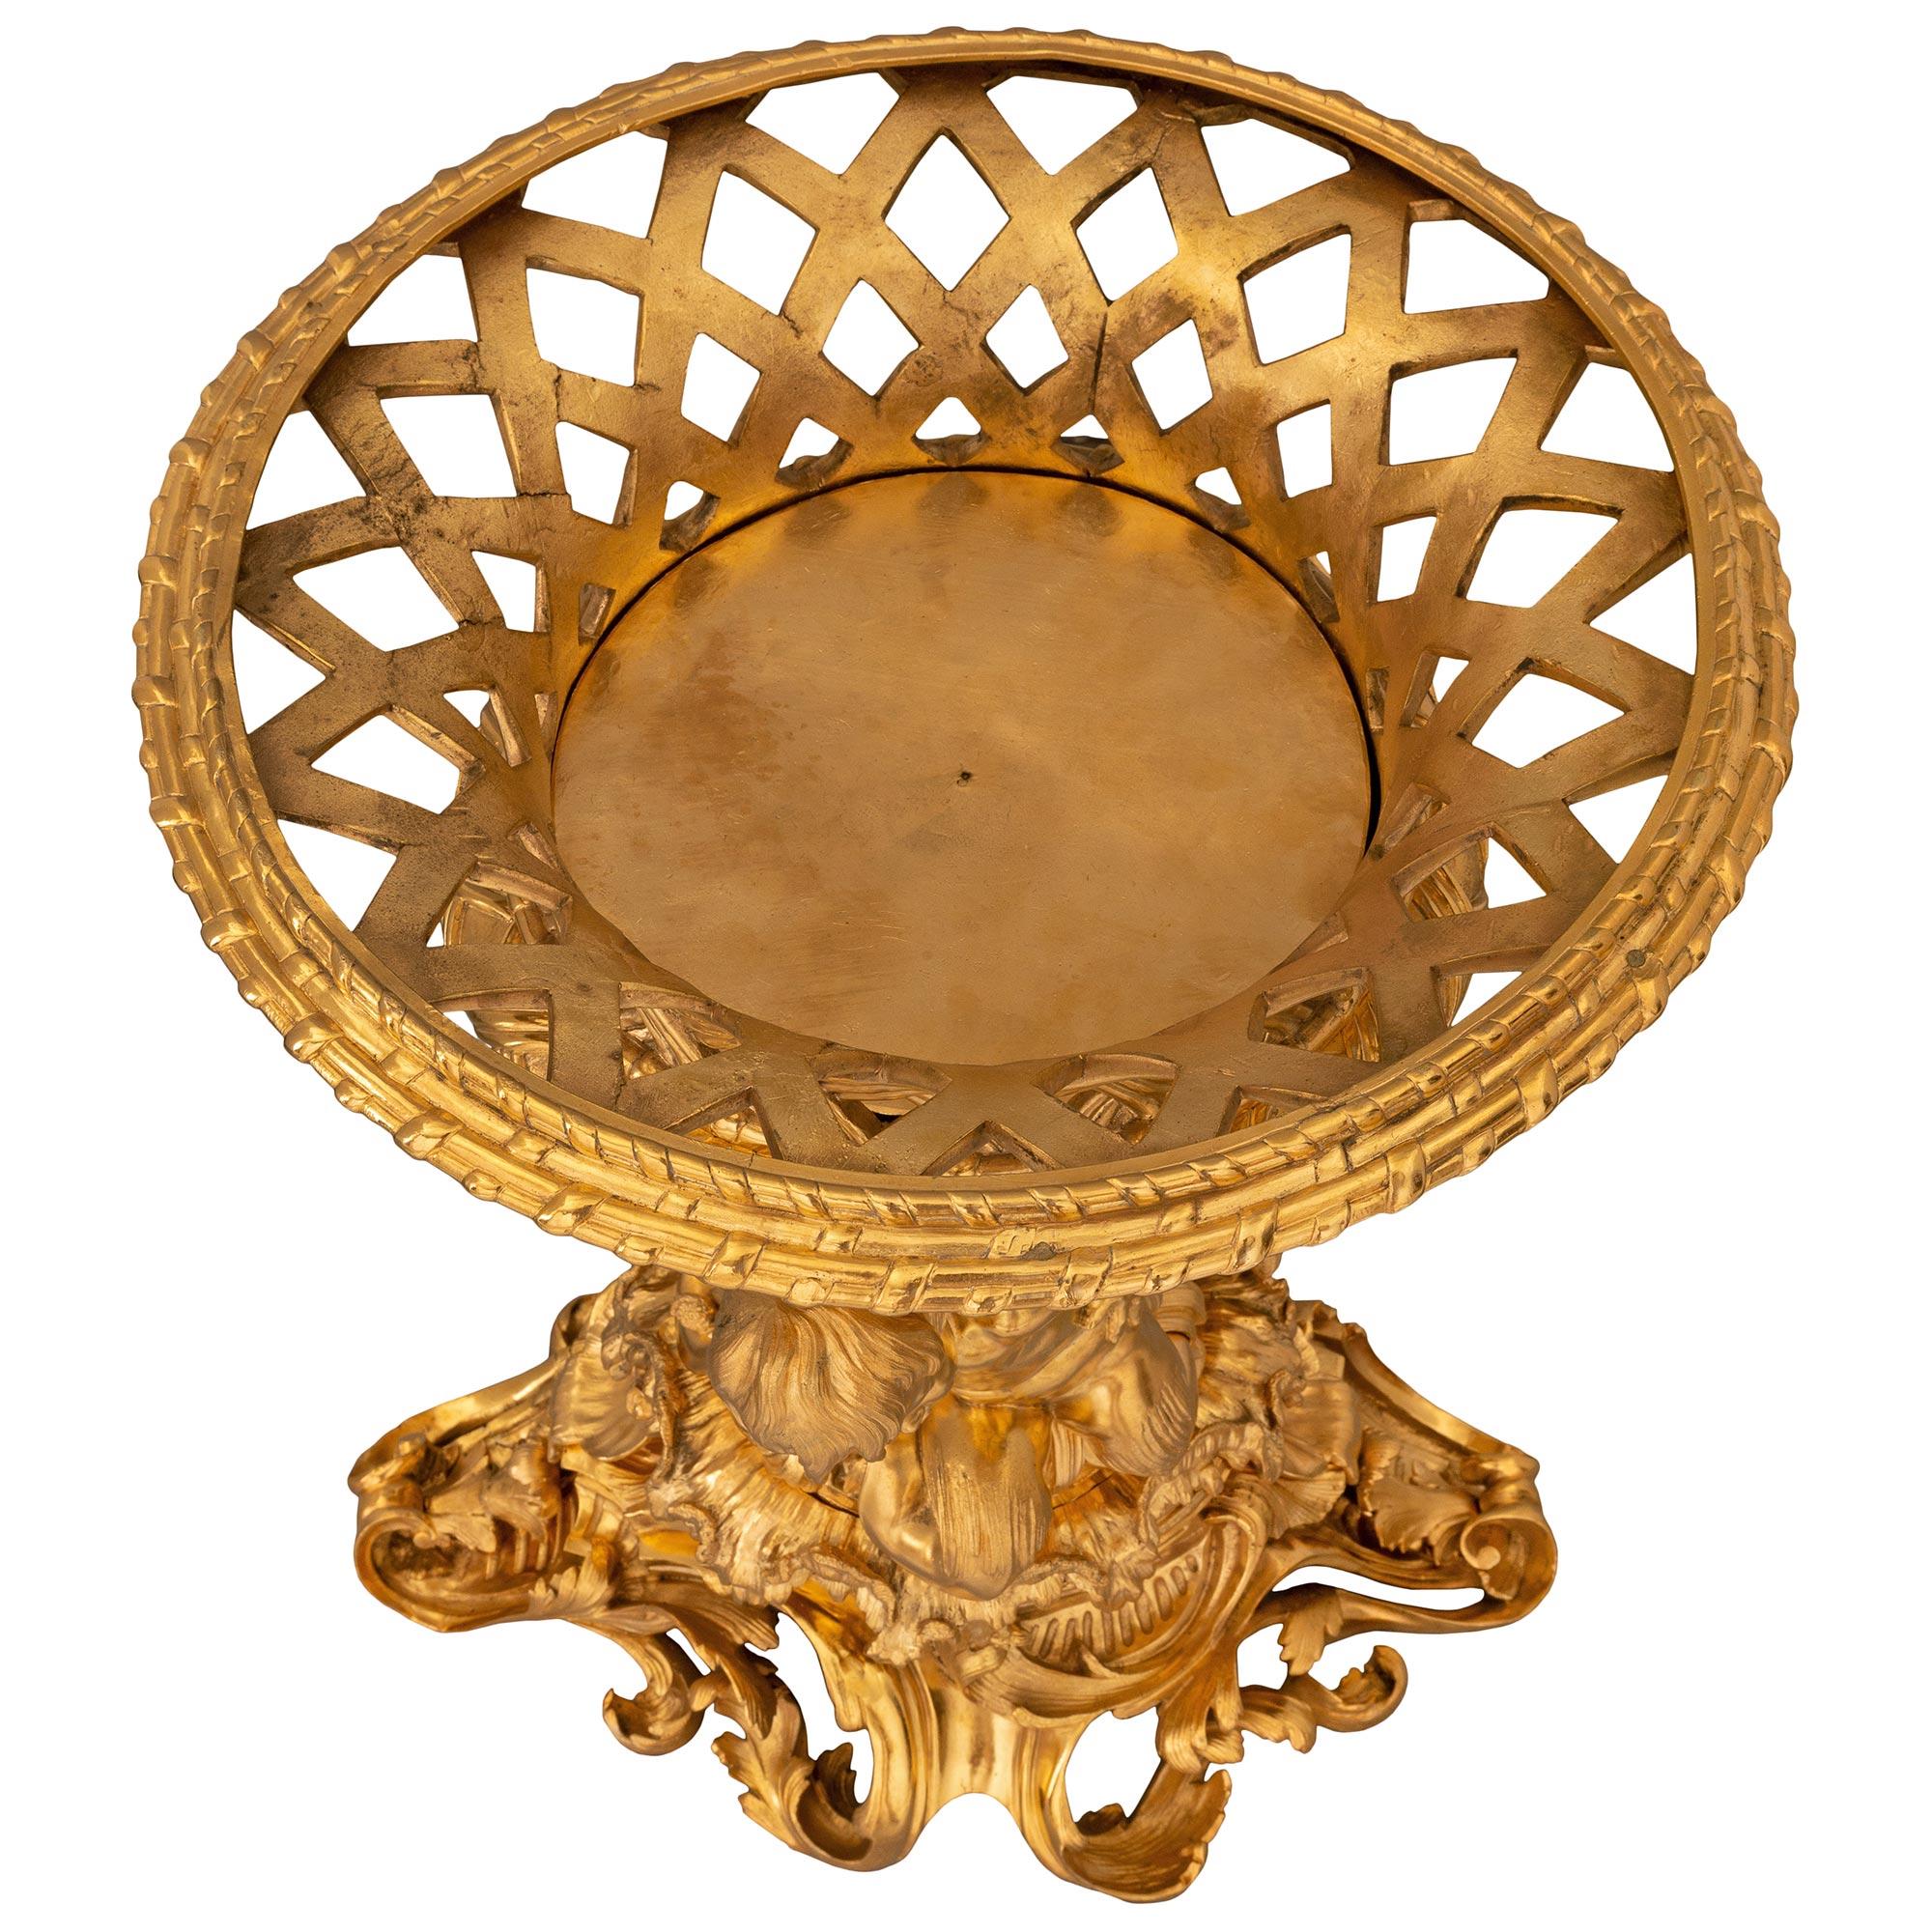 A stunning and extremely high quality French 19th century Louis XVI st. ormolu centerpiece attributed to Henry Dasson. The centerpiece is raised by an exceptional and most decorative pierced base with most decorative scrolled foliate movements in a